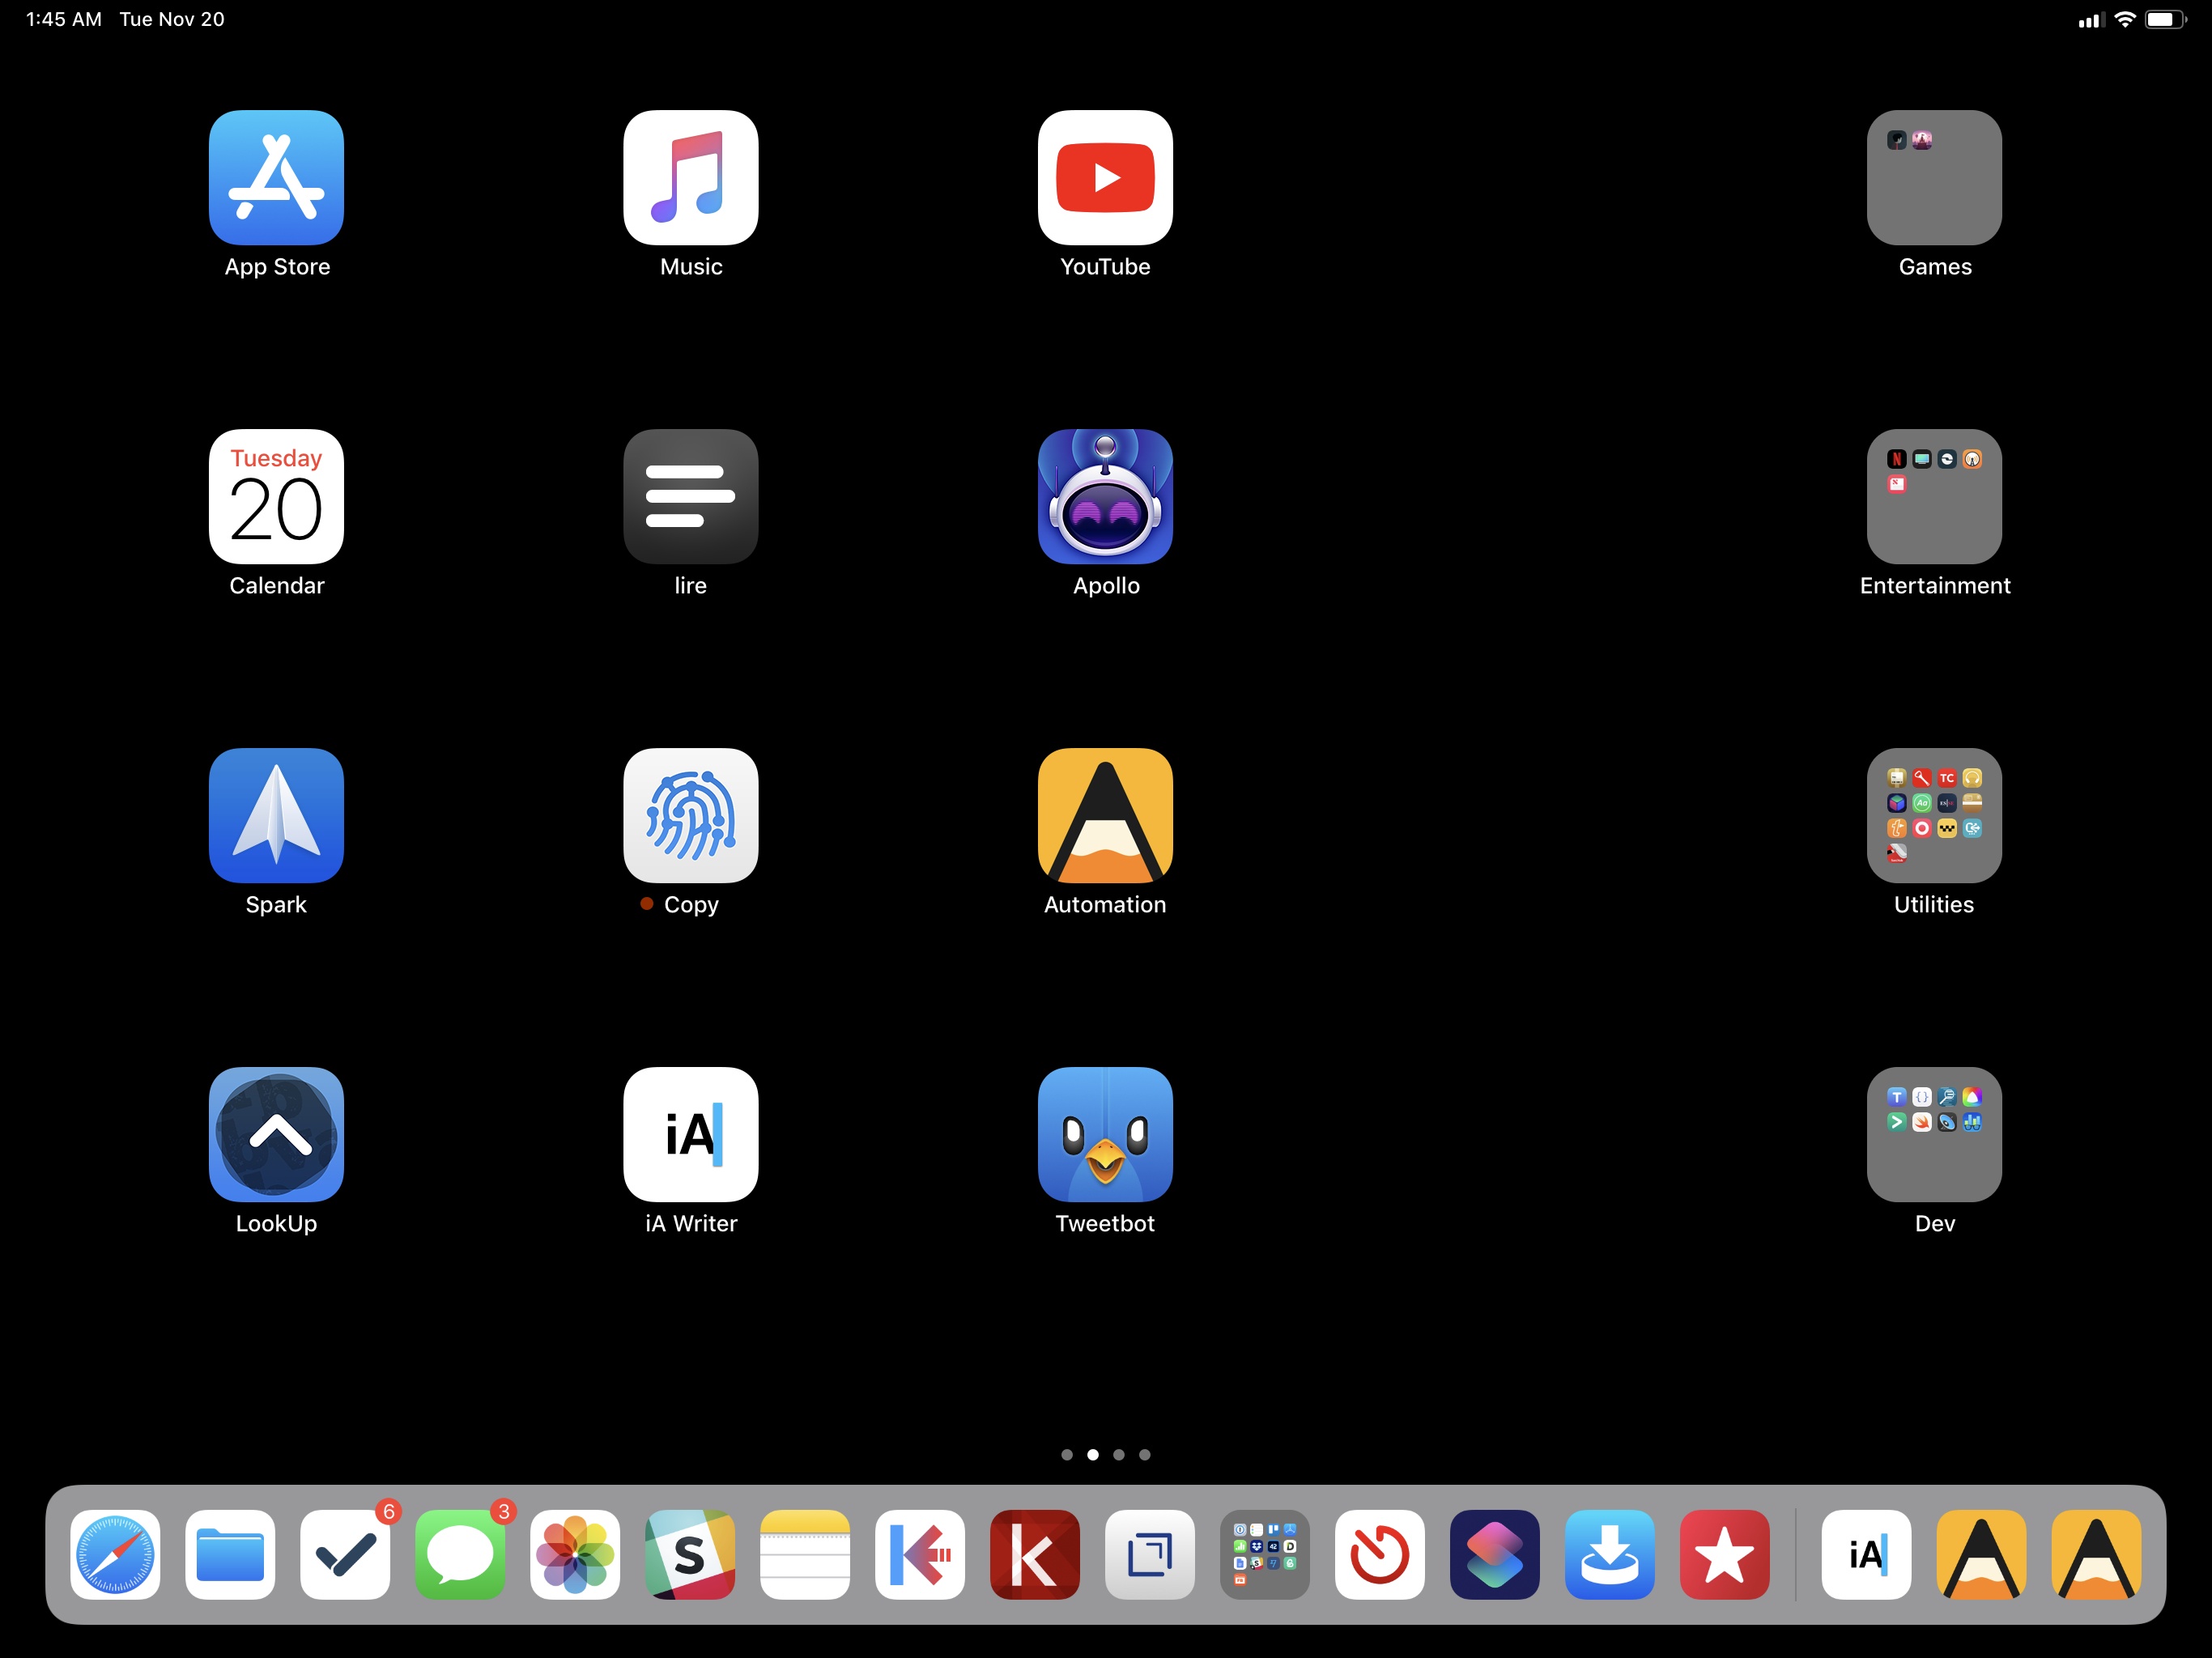 My iPad Pro home screen. Notice the two icons for Agenda in the dock – one for the app, one for my launcher.